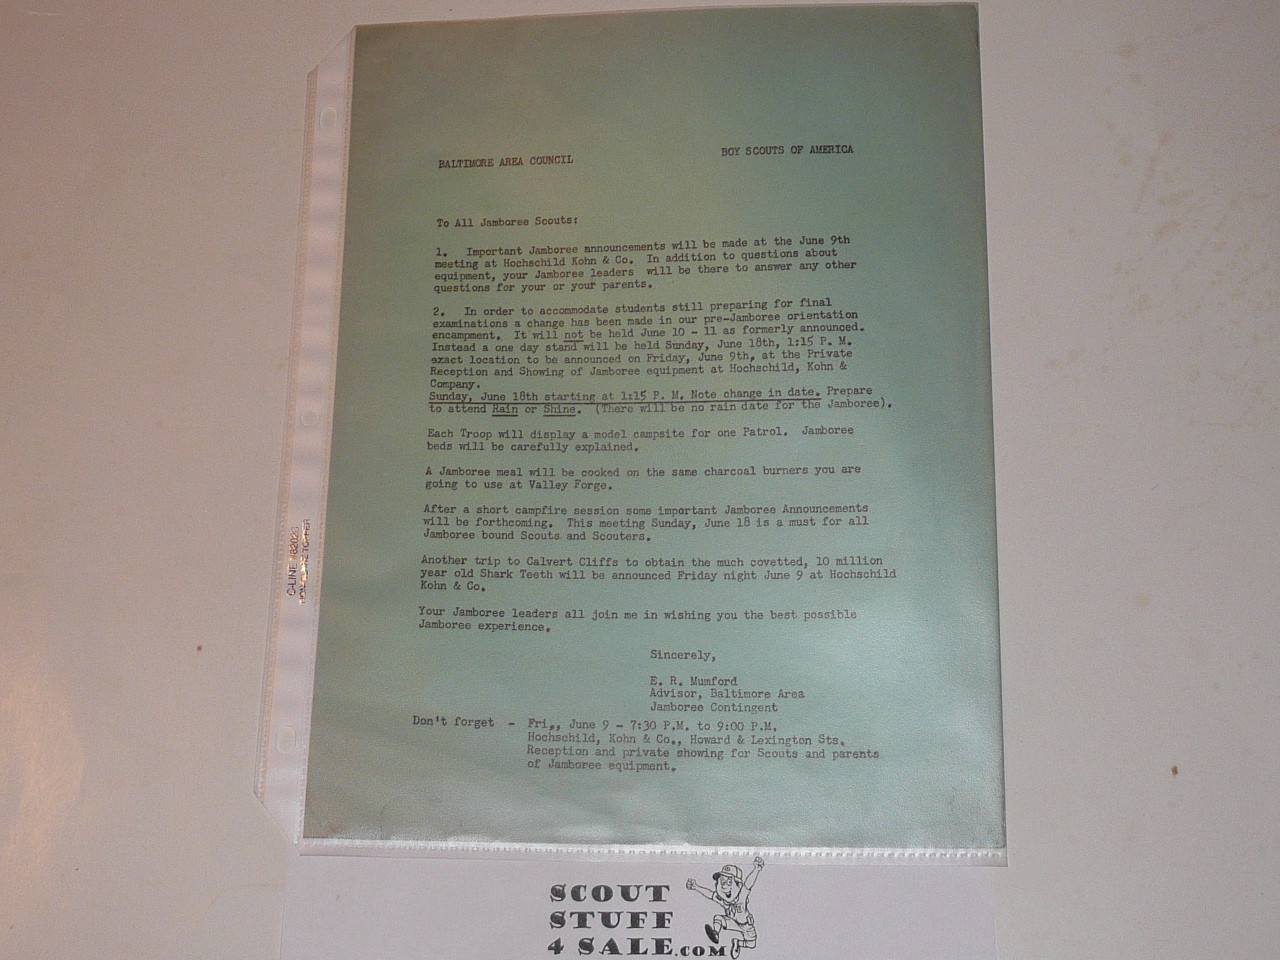 1950 National Jamboree Paperwork Packet from Balimore Area Council to Contingent member